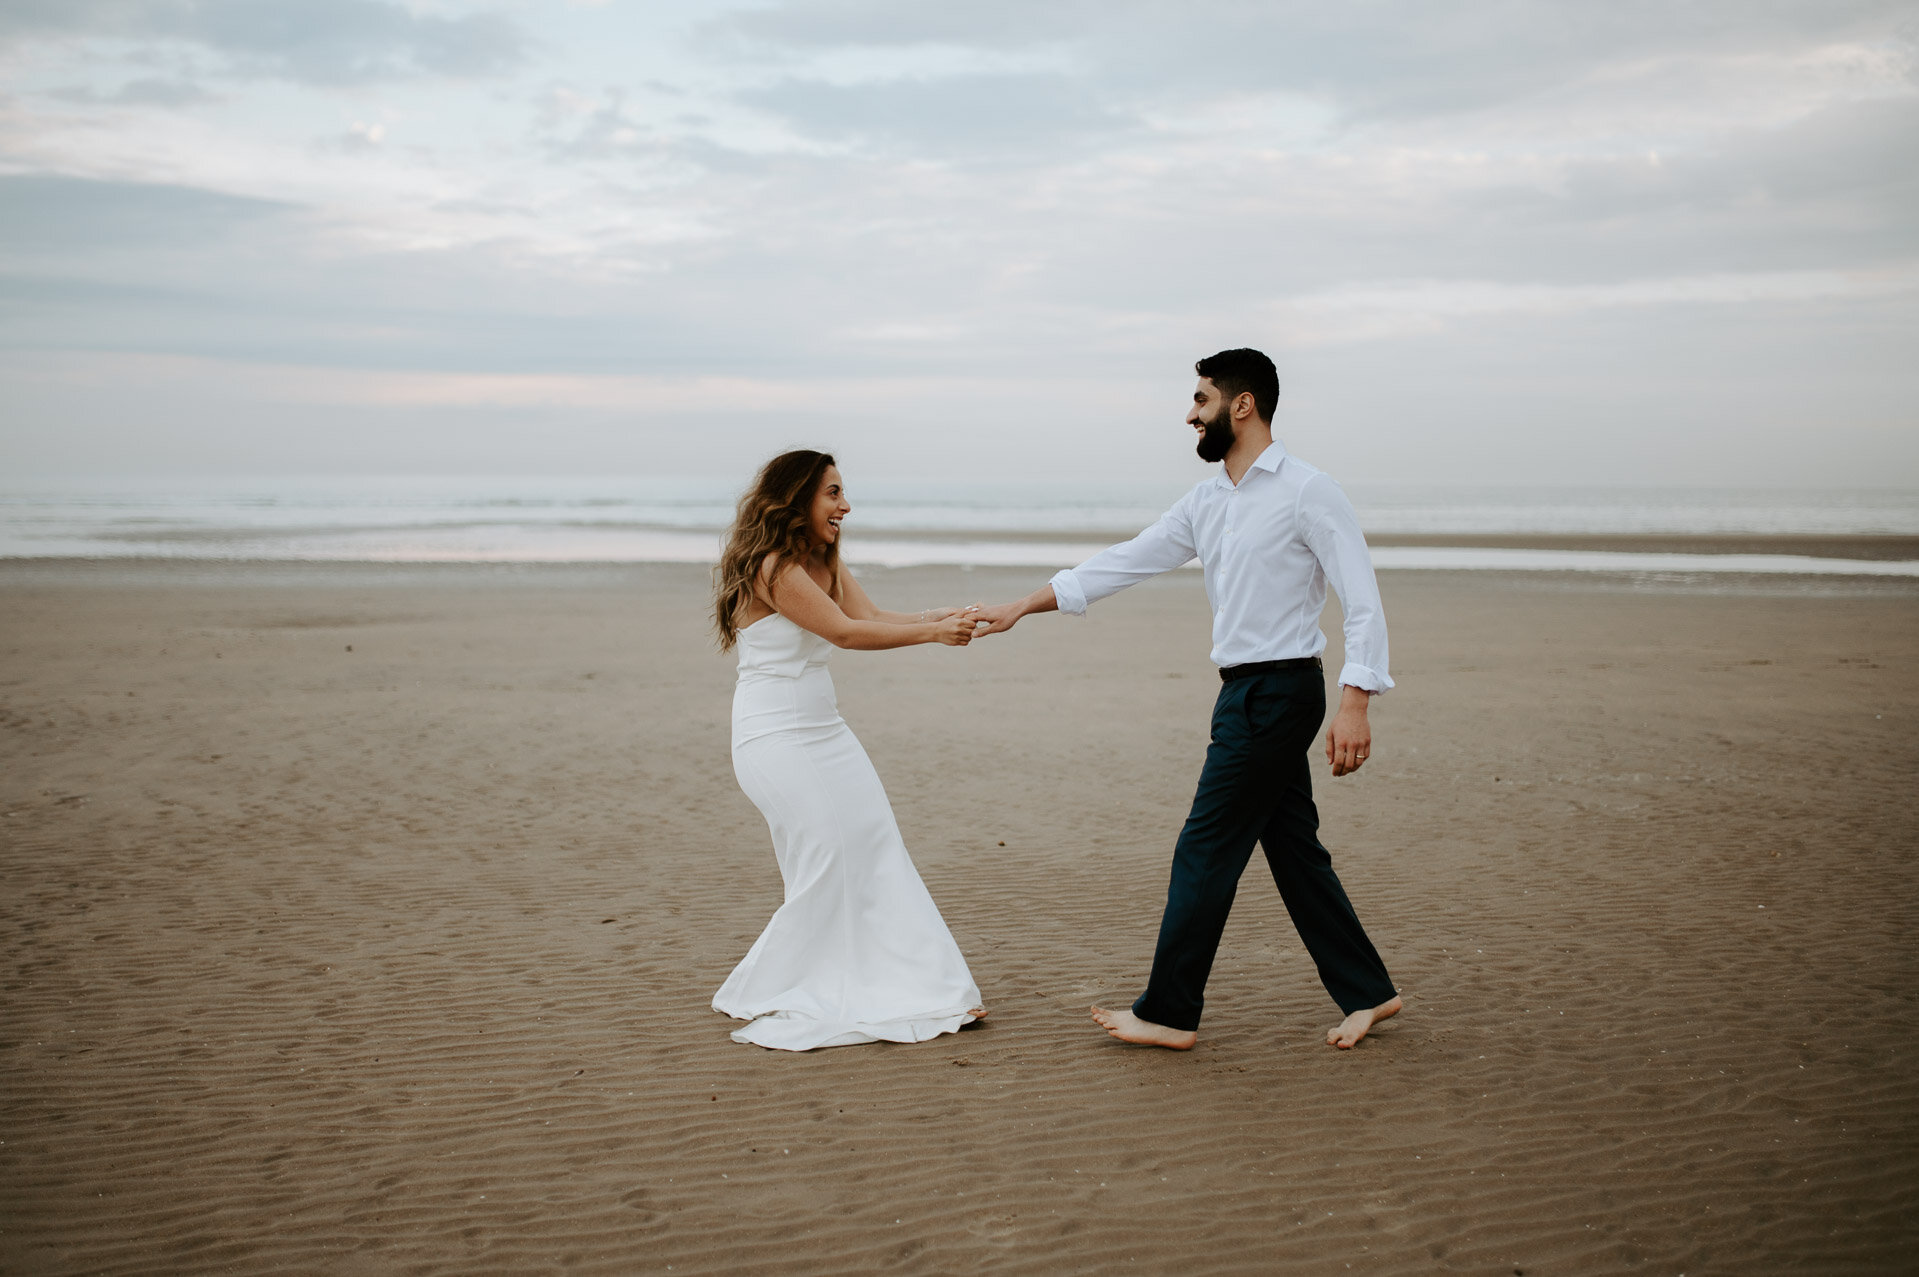 Demiana and Goergeuos - Camber Sands Golden Hour Beach Shoot - Laura Williams Photography-17.jpg